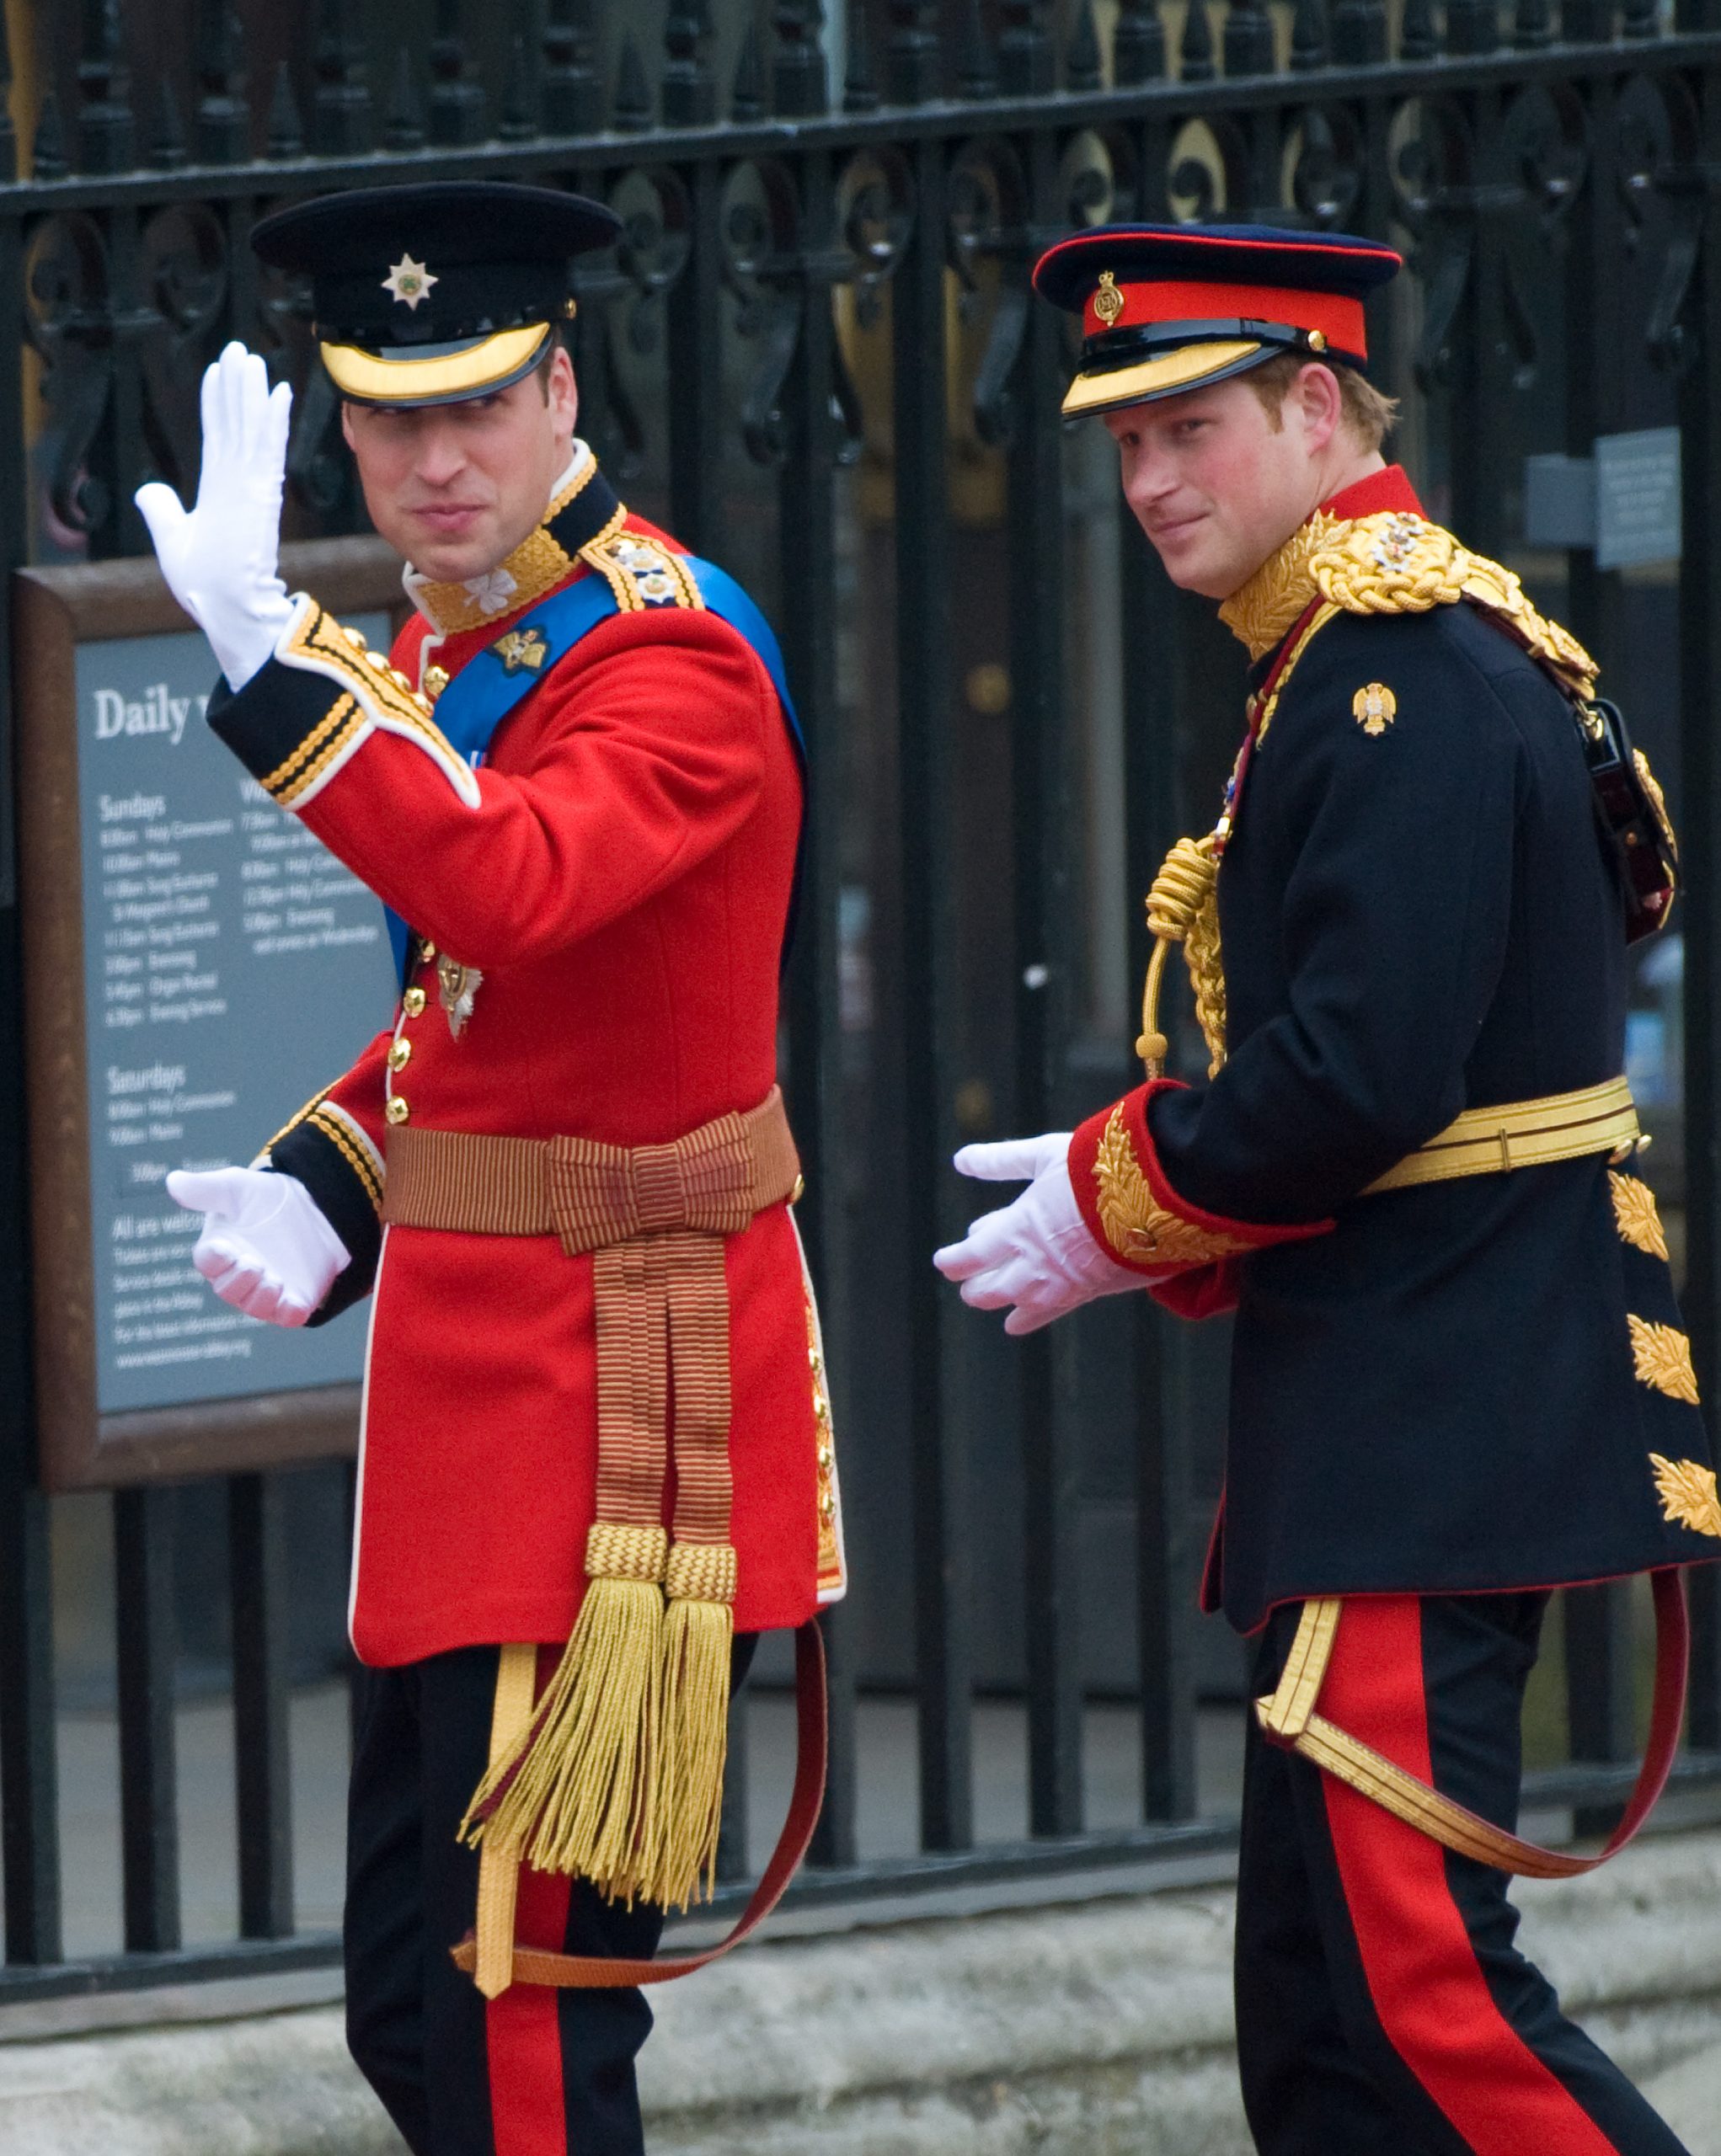 Prince William and Prince Harry arrive for William's royal wedding at Westminster Abbey